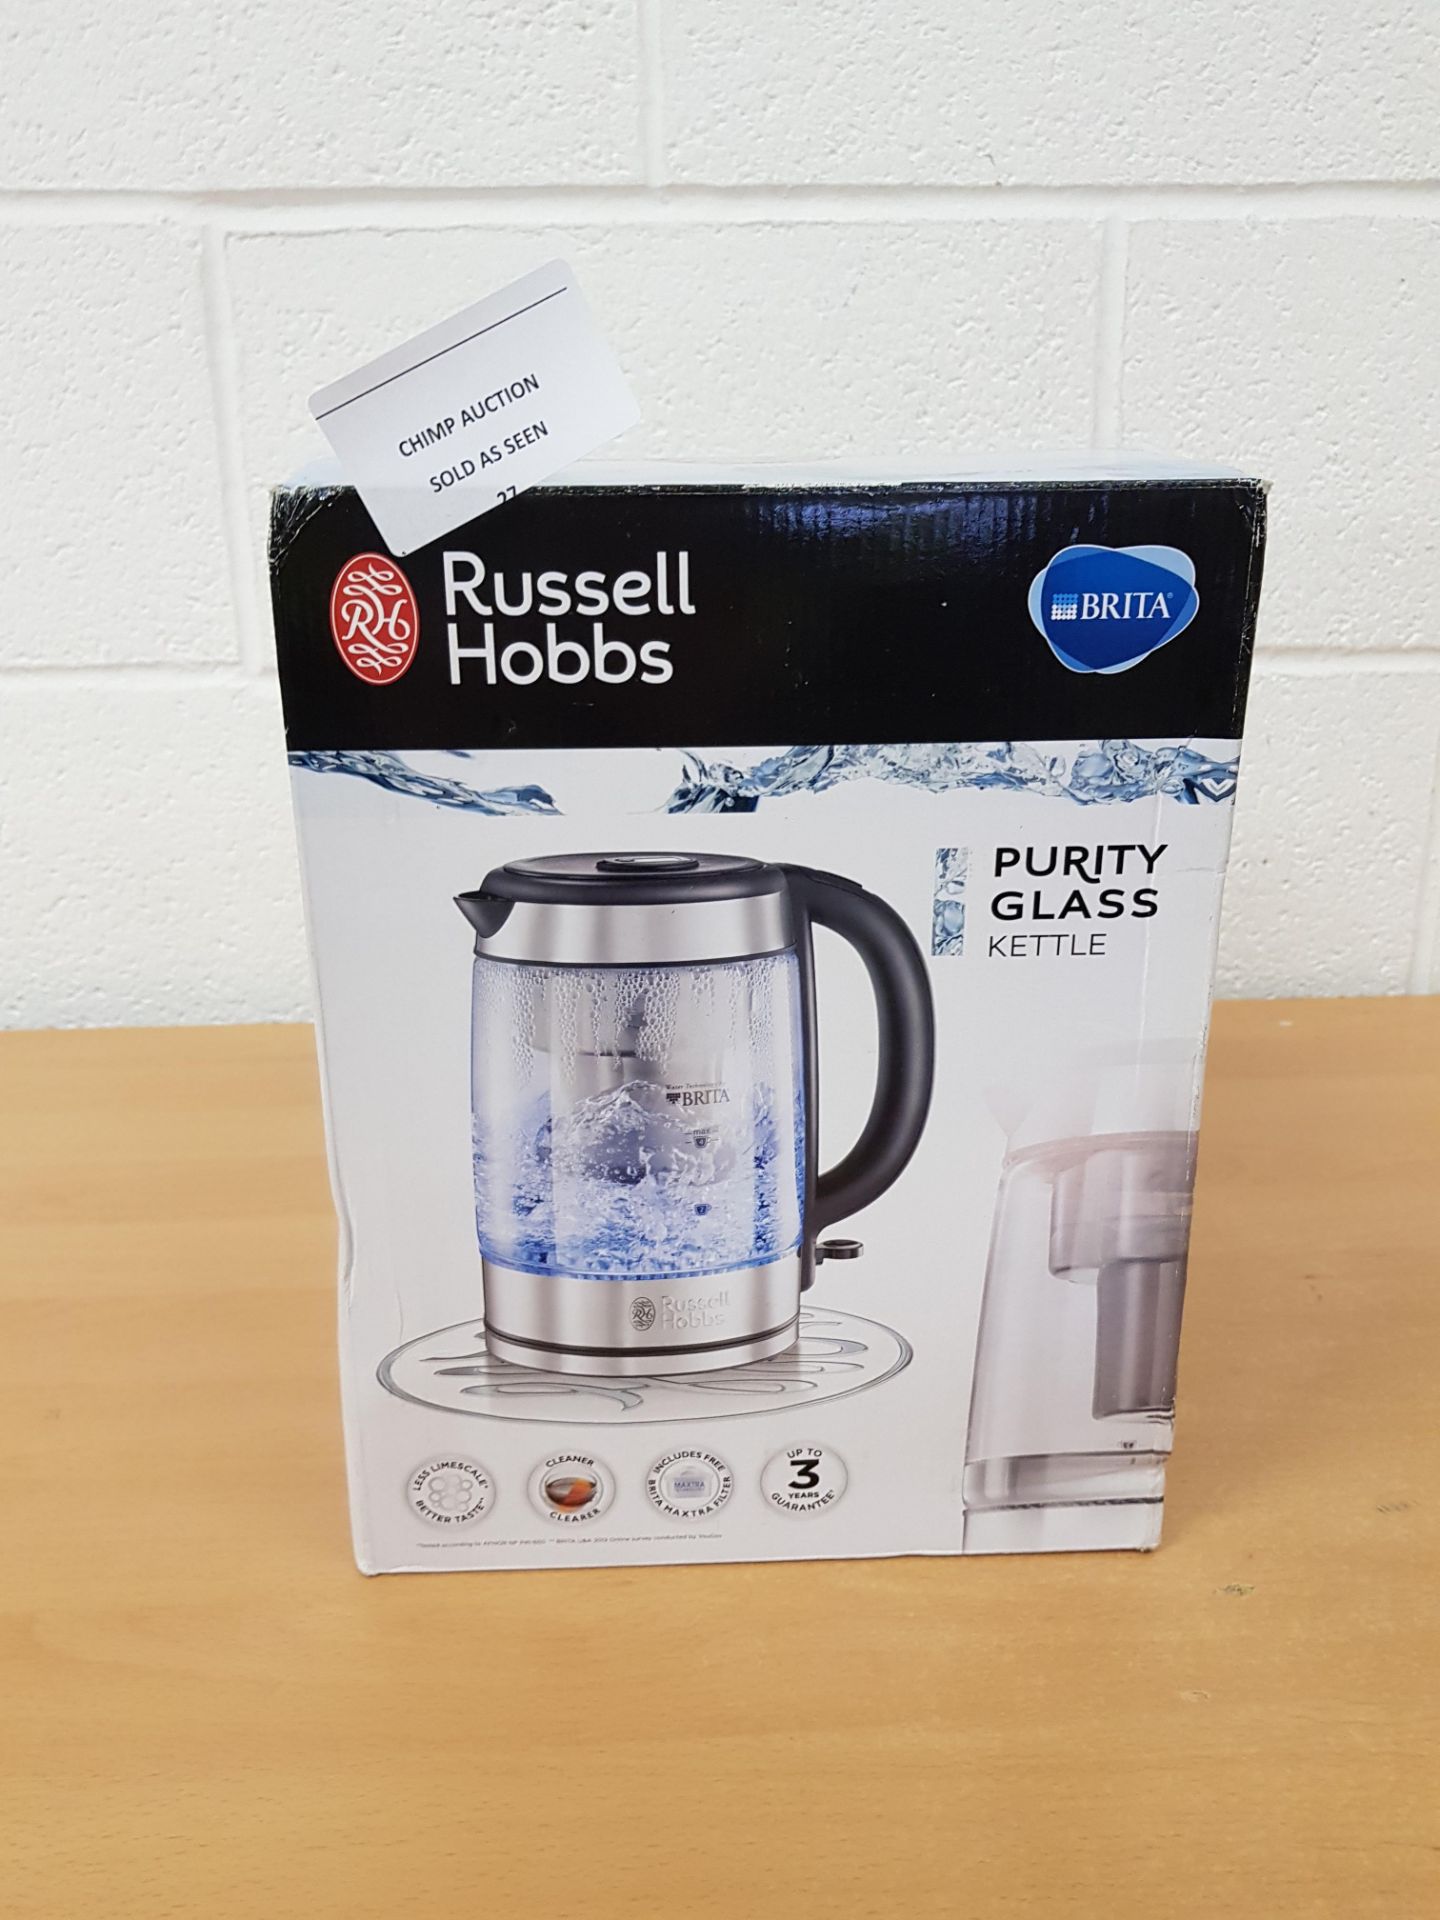 Russell Hobbs Purity Glass Kettle